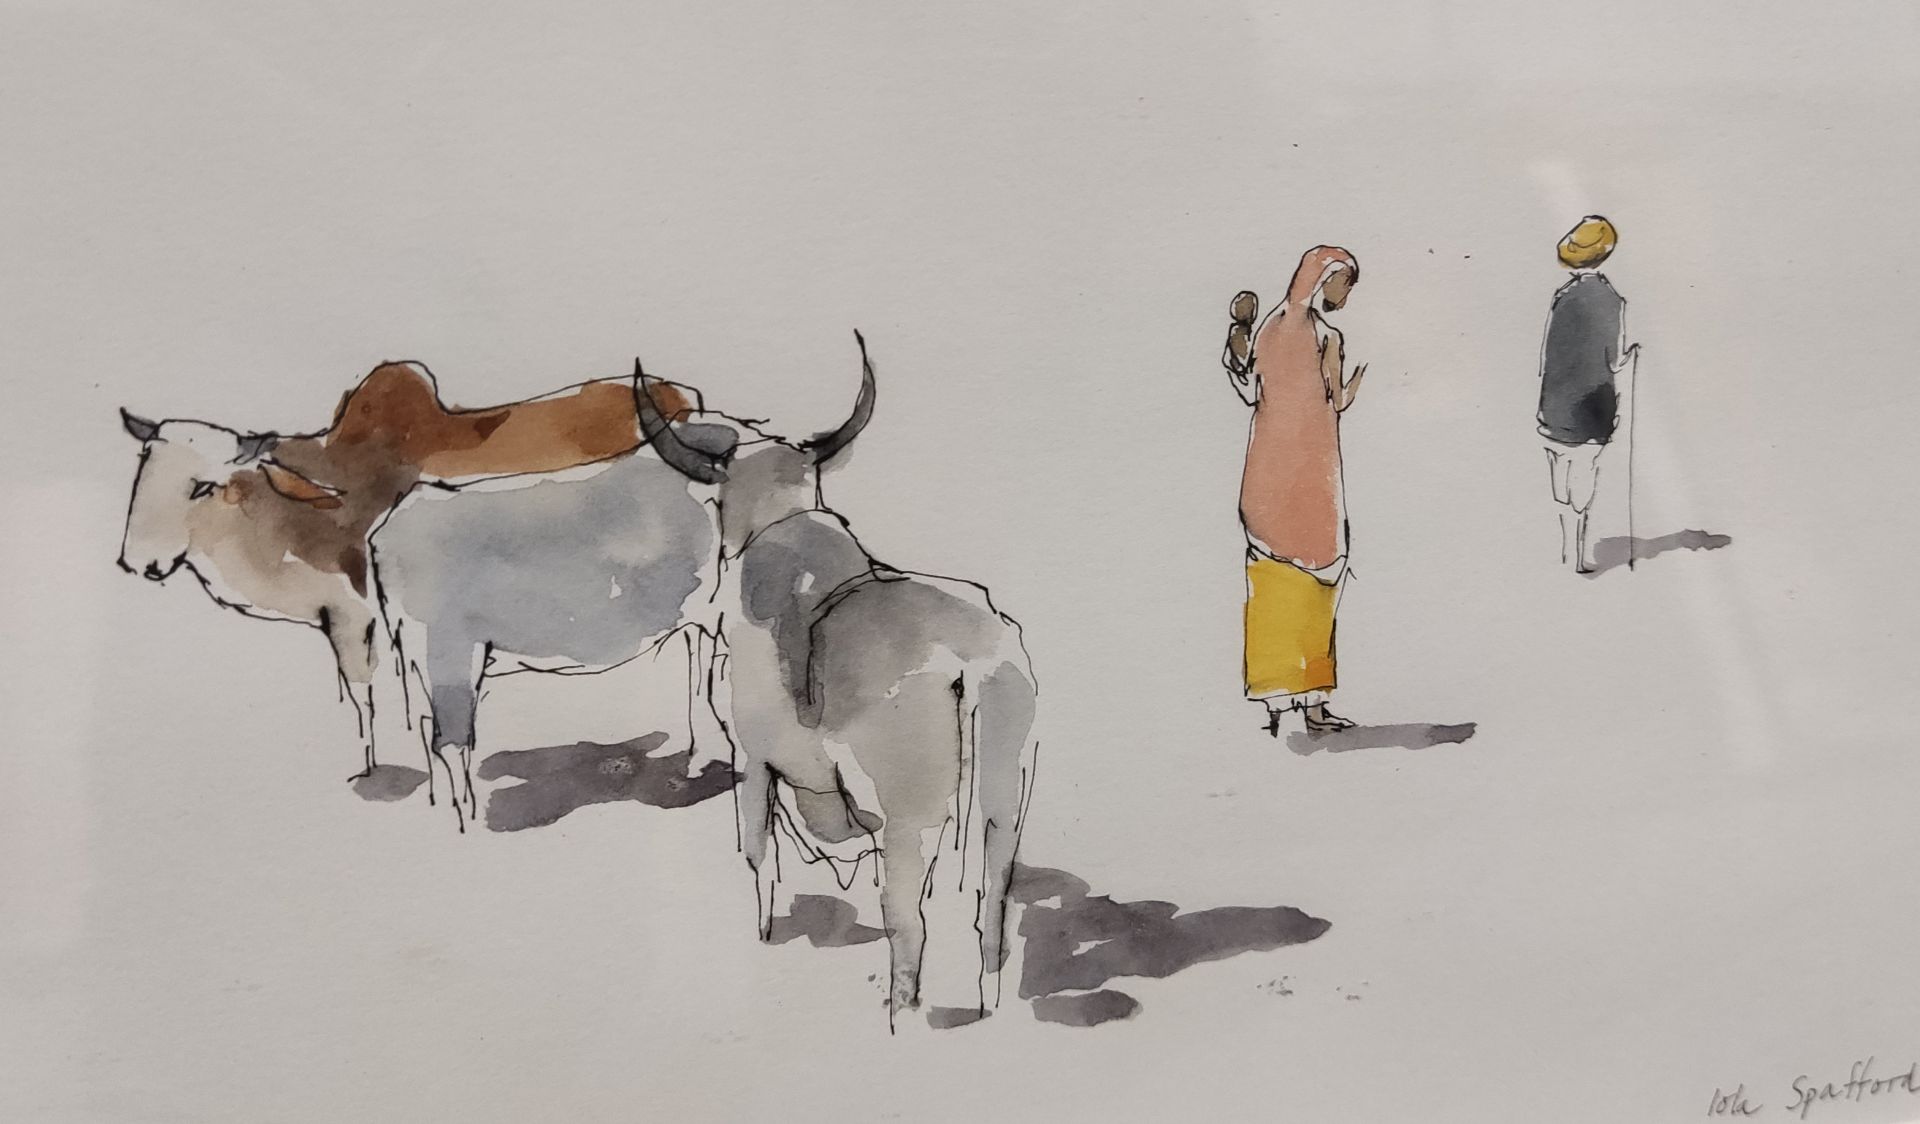 1 x Indian Cattle Watercolour by Iola Spafford - Ref: CNT434 - CL845 - Location: Altrincham WA14 - Image 7 of 9